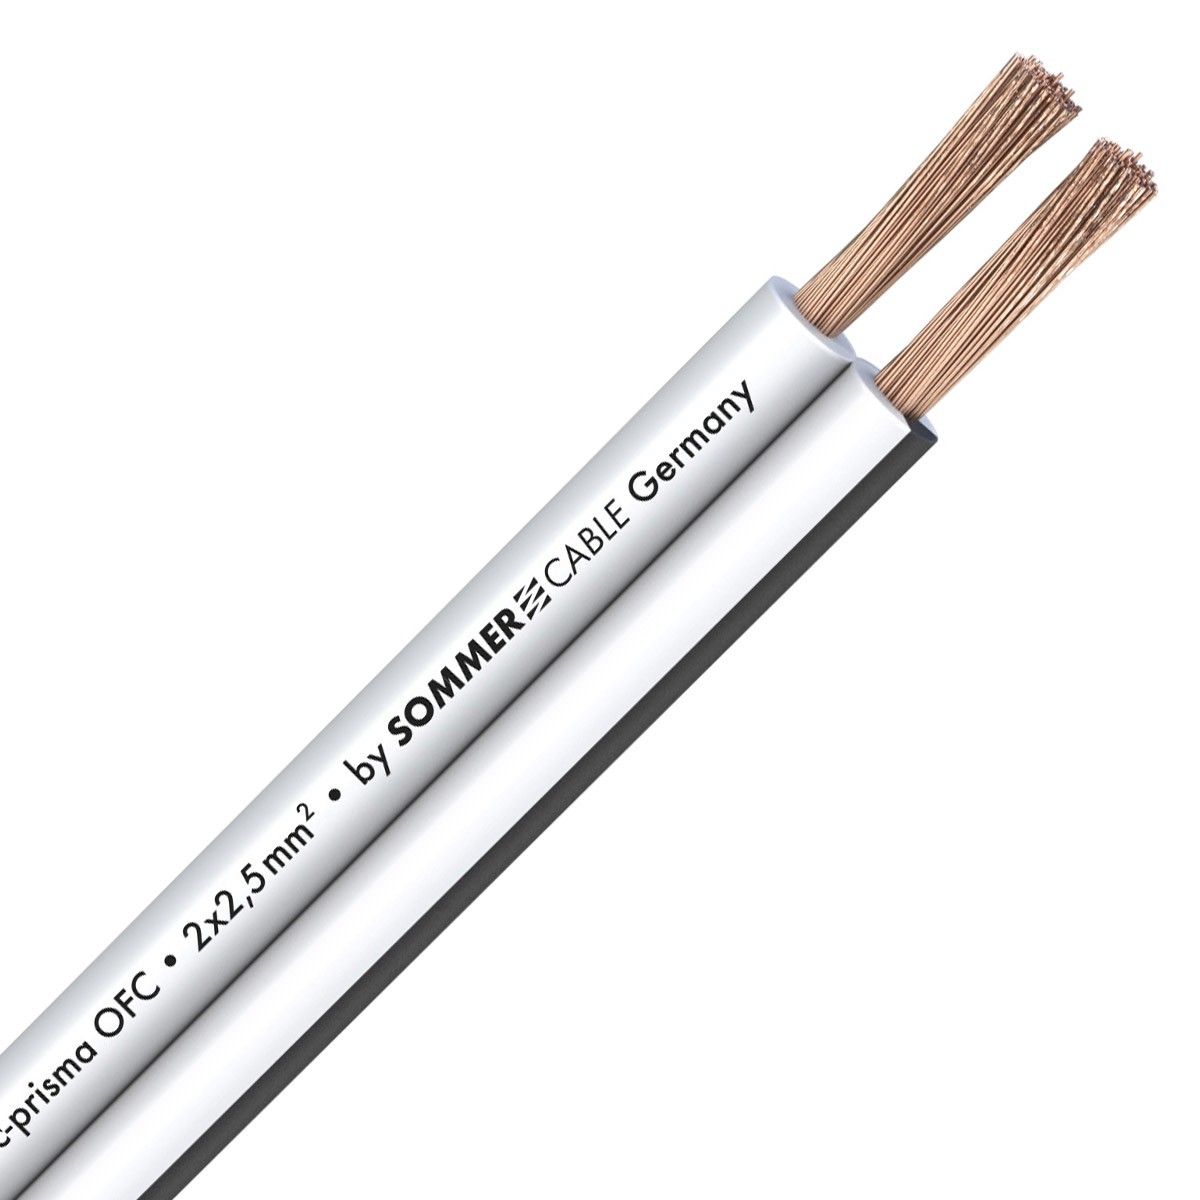 SOMMERCABLE PRISMA 225 Speaker Cable OFC Copper 2x2.5mm²